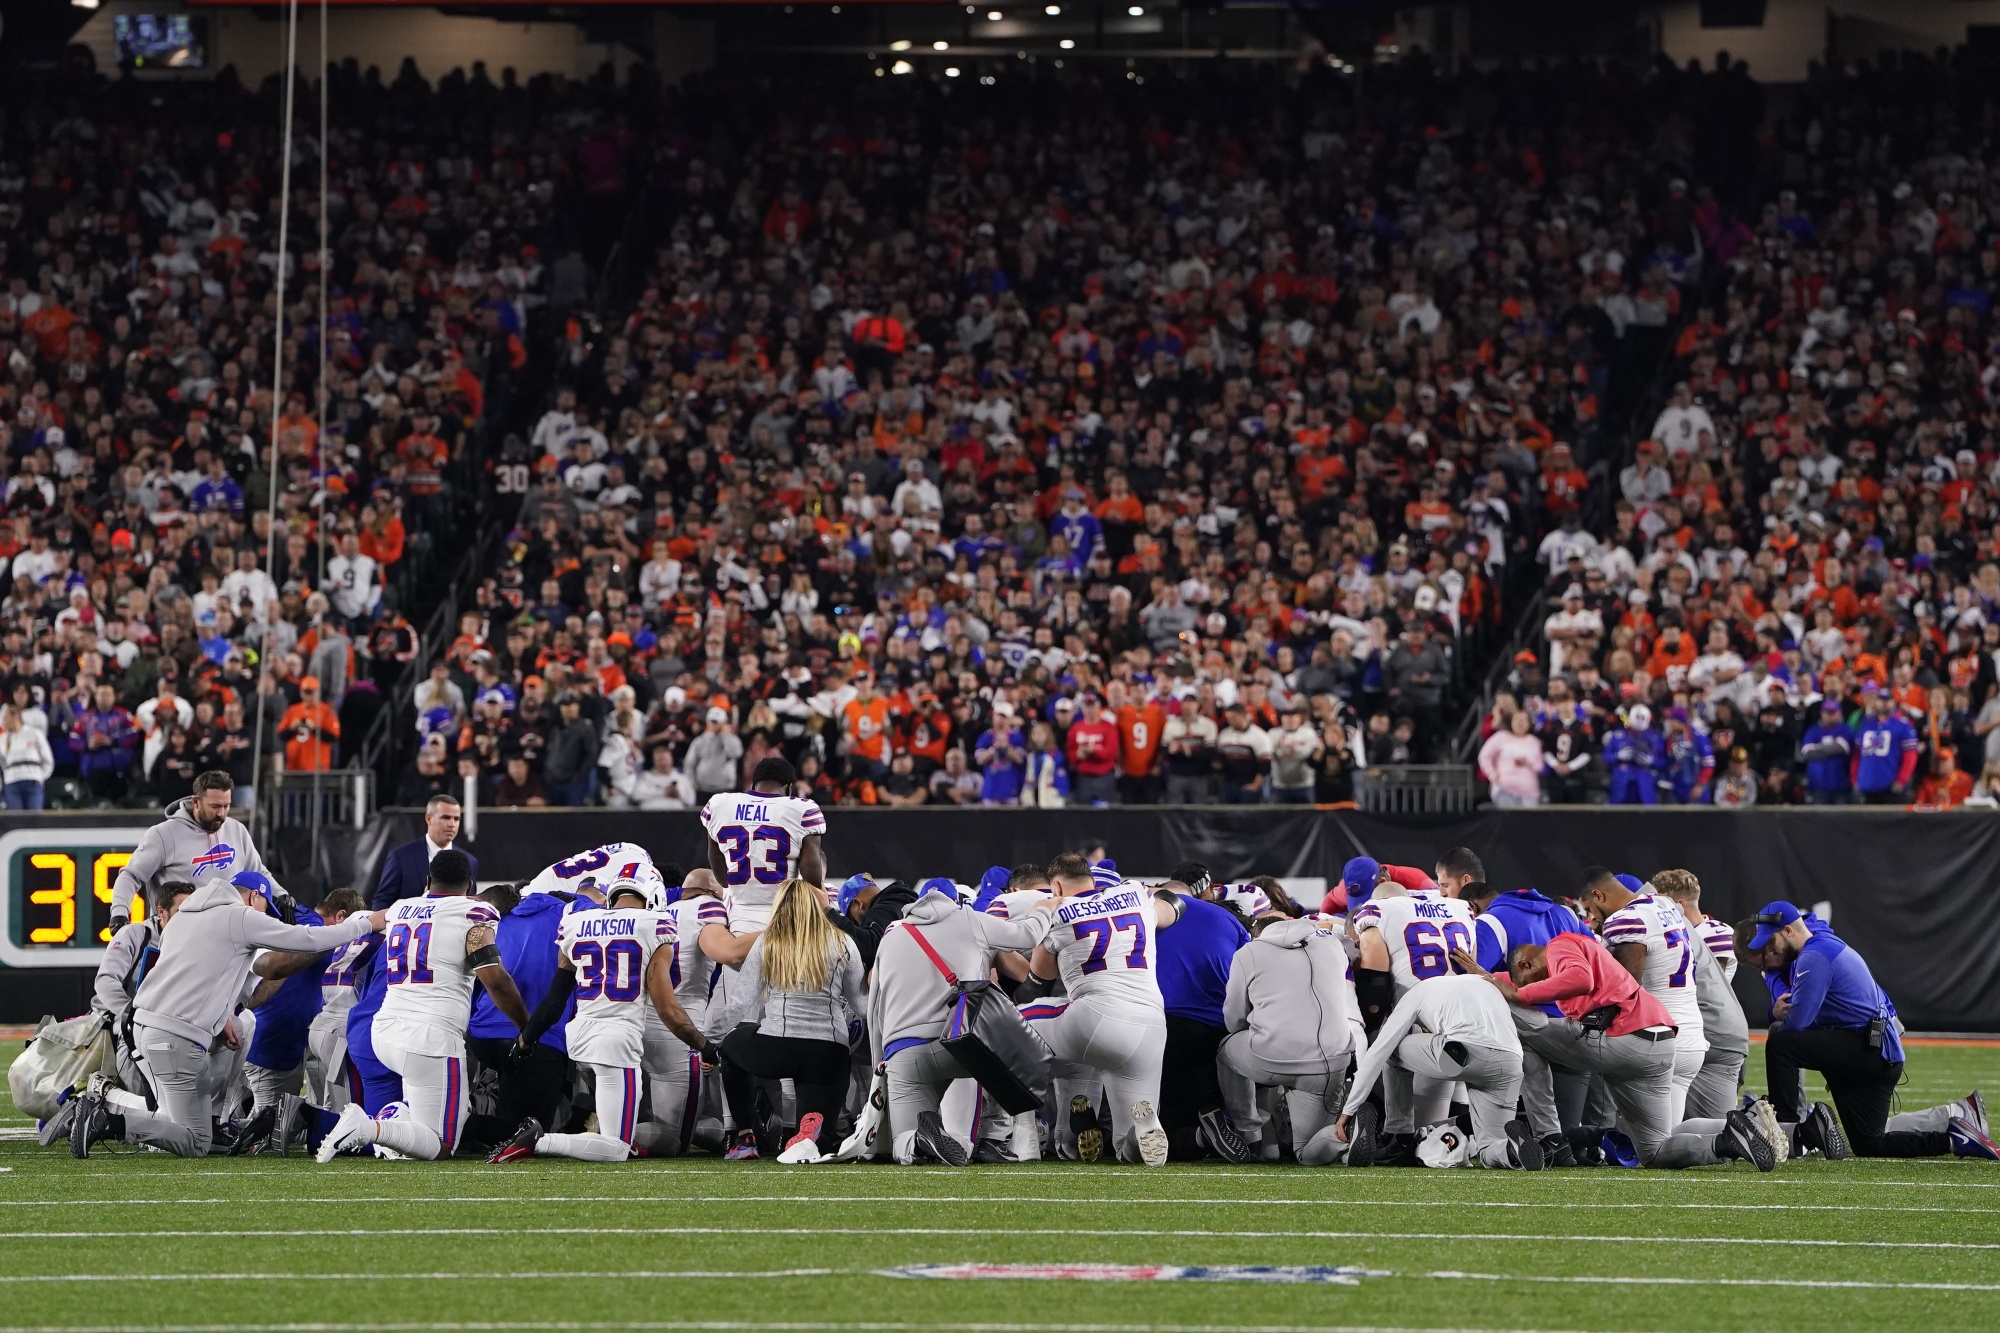 Buffalo Bills players huddle on the field after Damar Hamlin collapsed on the field on January 2.